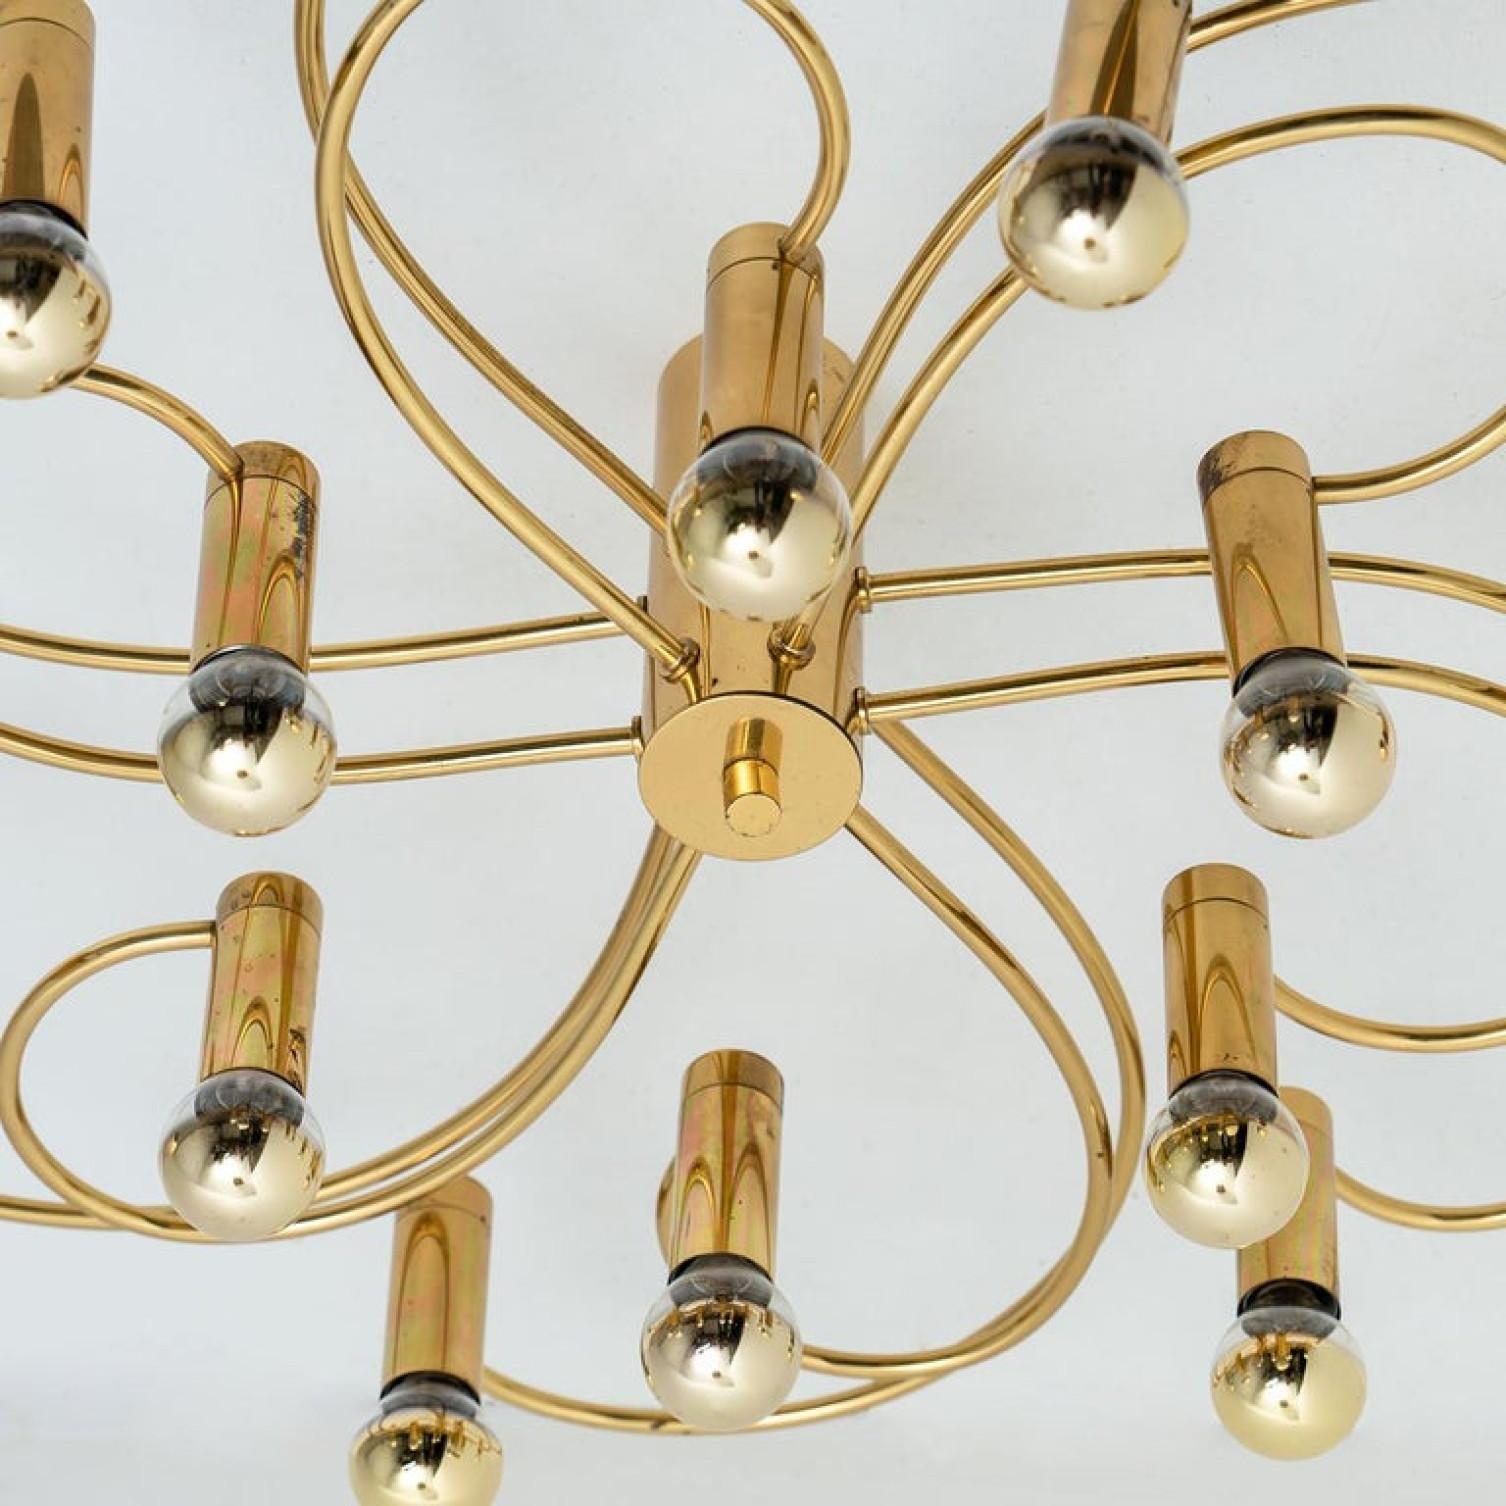 1 of the 2 Leola Sculptural Brass 13-Light Ceiling or Wall Flush Mount, 1970s For Sale 10